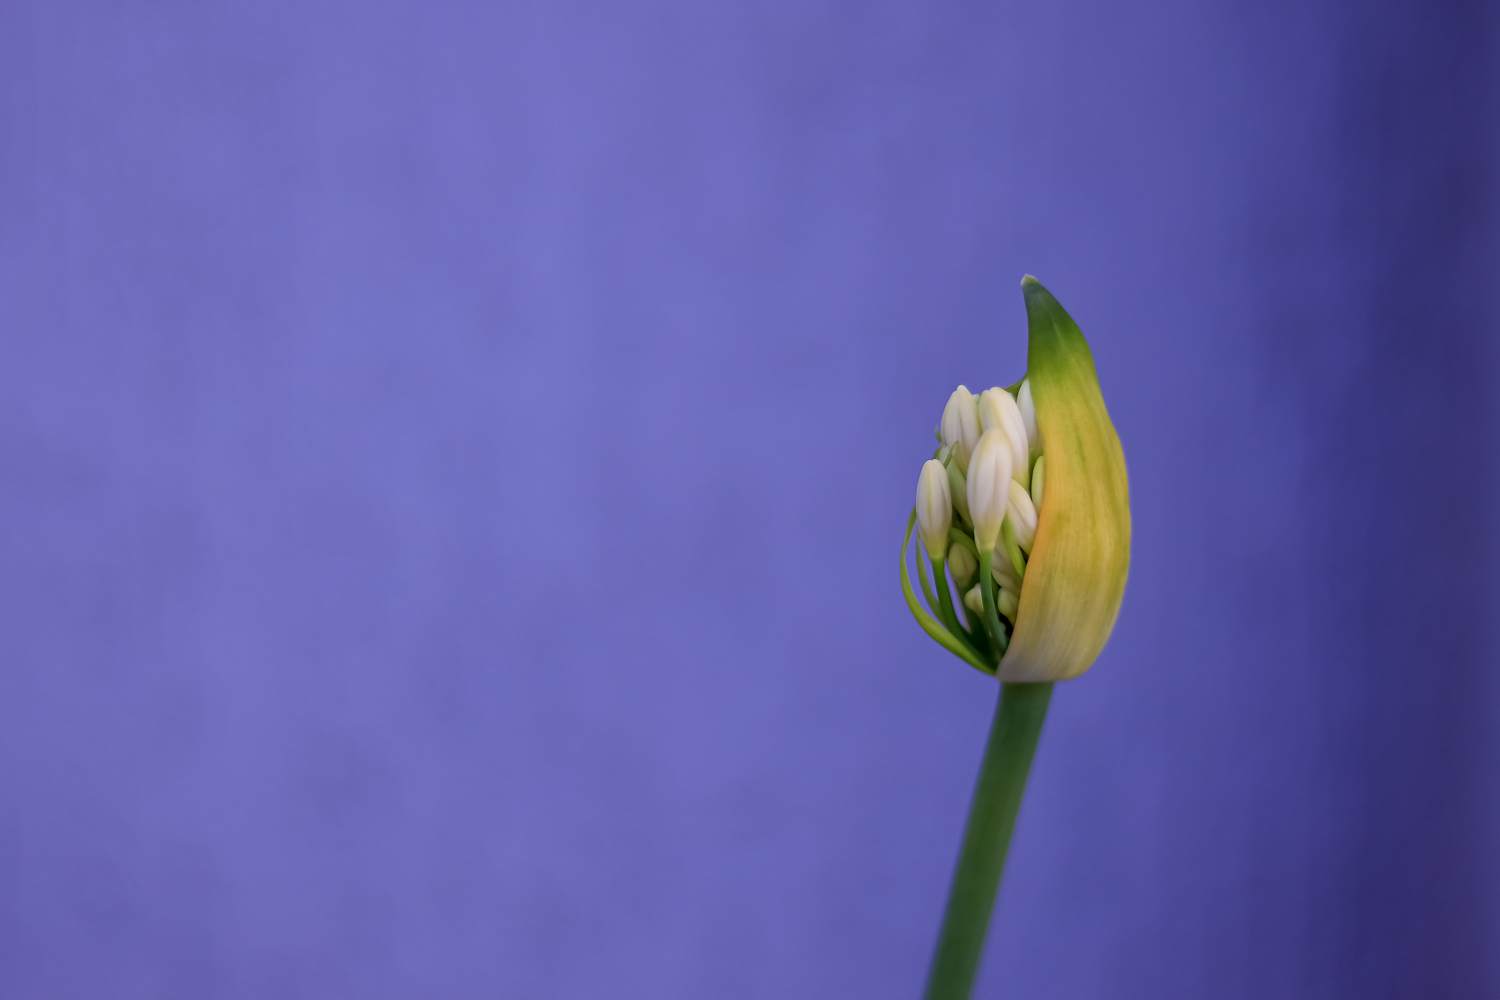 An agapanthus bud starting to flower against a purple wall